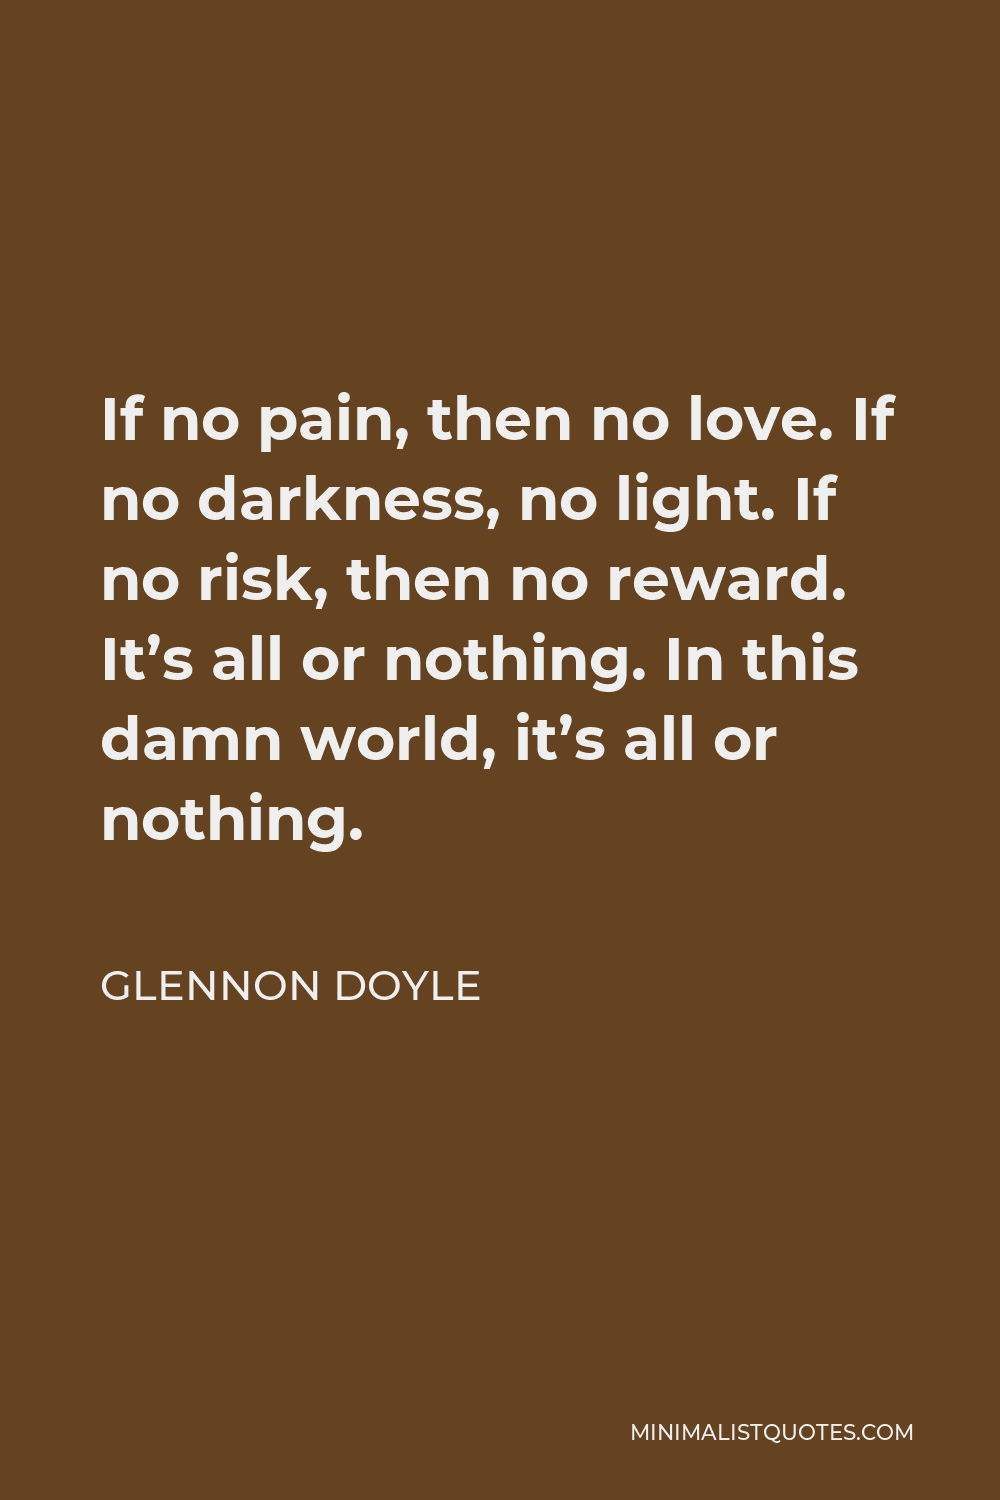 Glennon Doyle Quote - If no pain, then no love. If no darkness, no light. If no risk, then no reward. It’s all or nothing. In this damn world, it’s all or nothing.